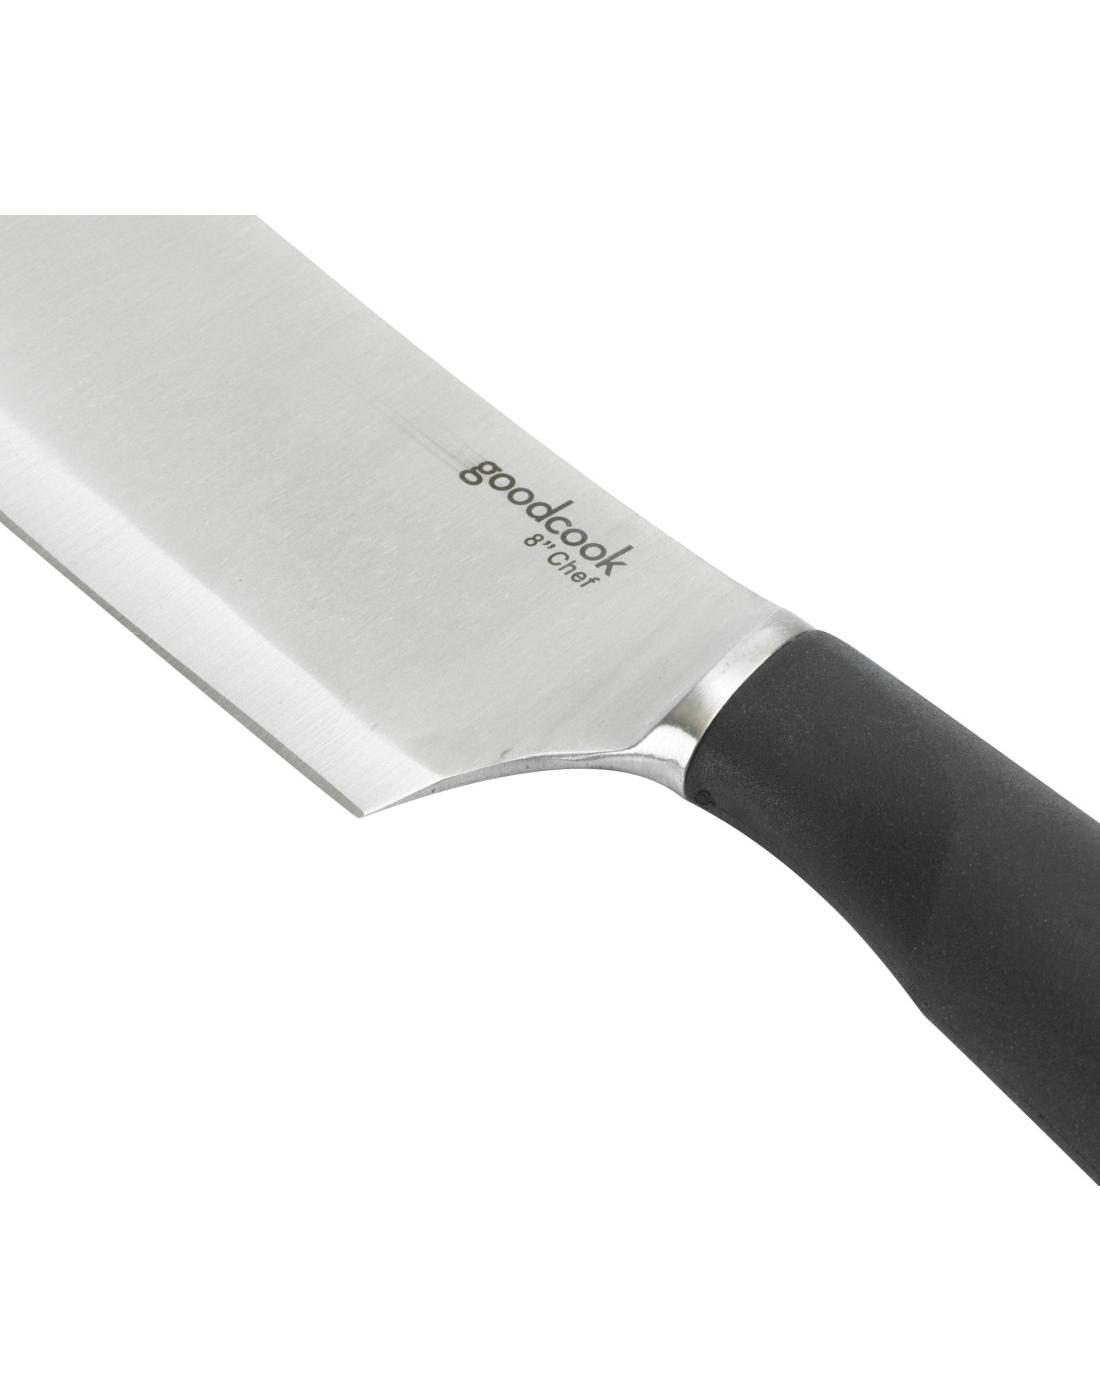 GoodCook Touch Chef's Knife; image 4 of 4